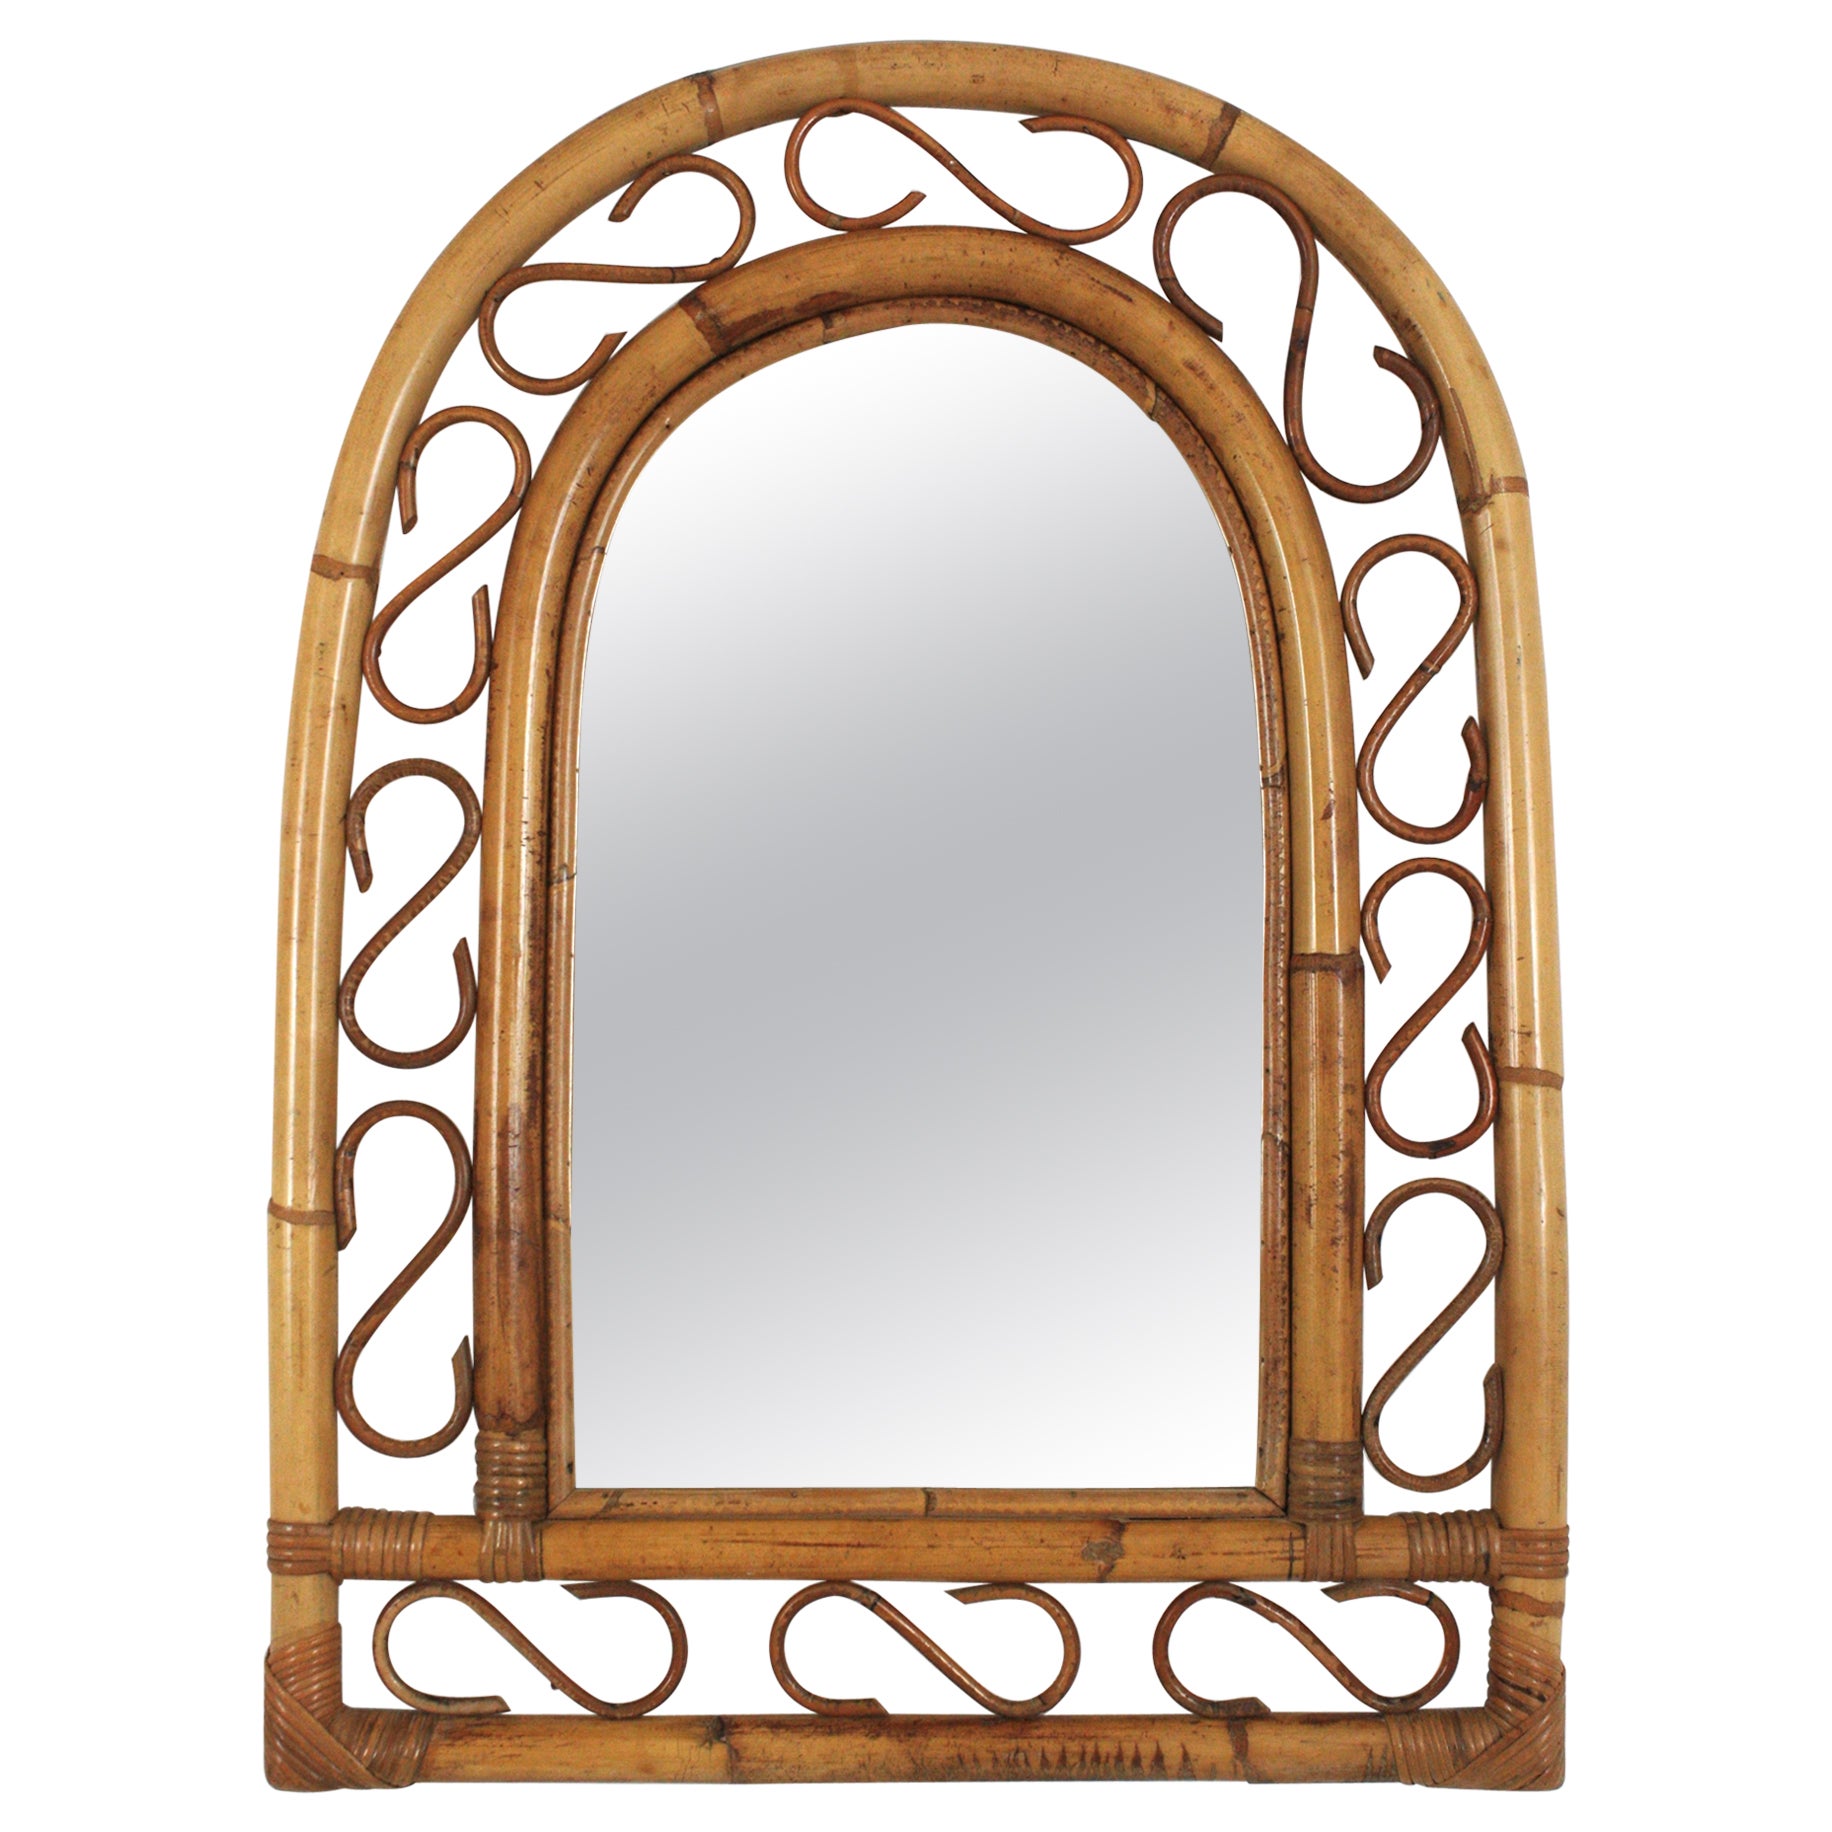 Franco Albini Style Bamboo Rattan Mirror with Arched Top For Sale